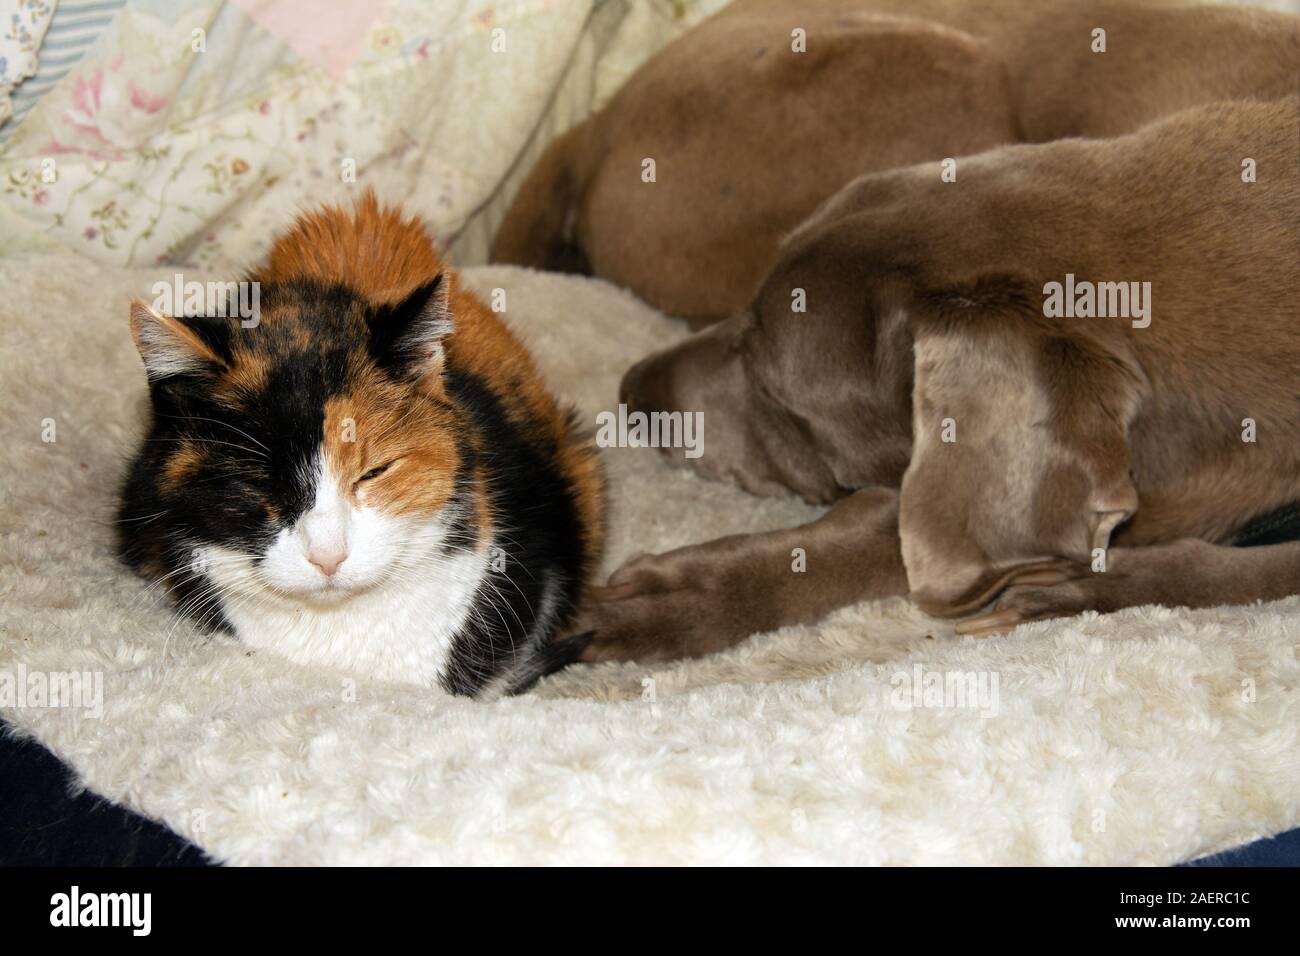 Old calico cat and an old Weimaraner dog sharing a dog bed, sleeping side by side Stock Photo